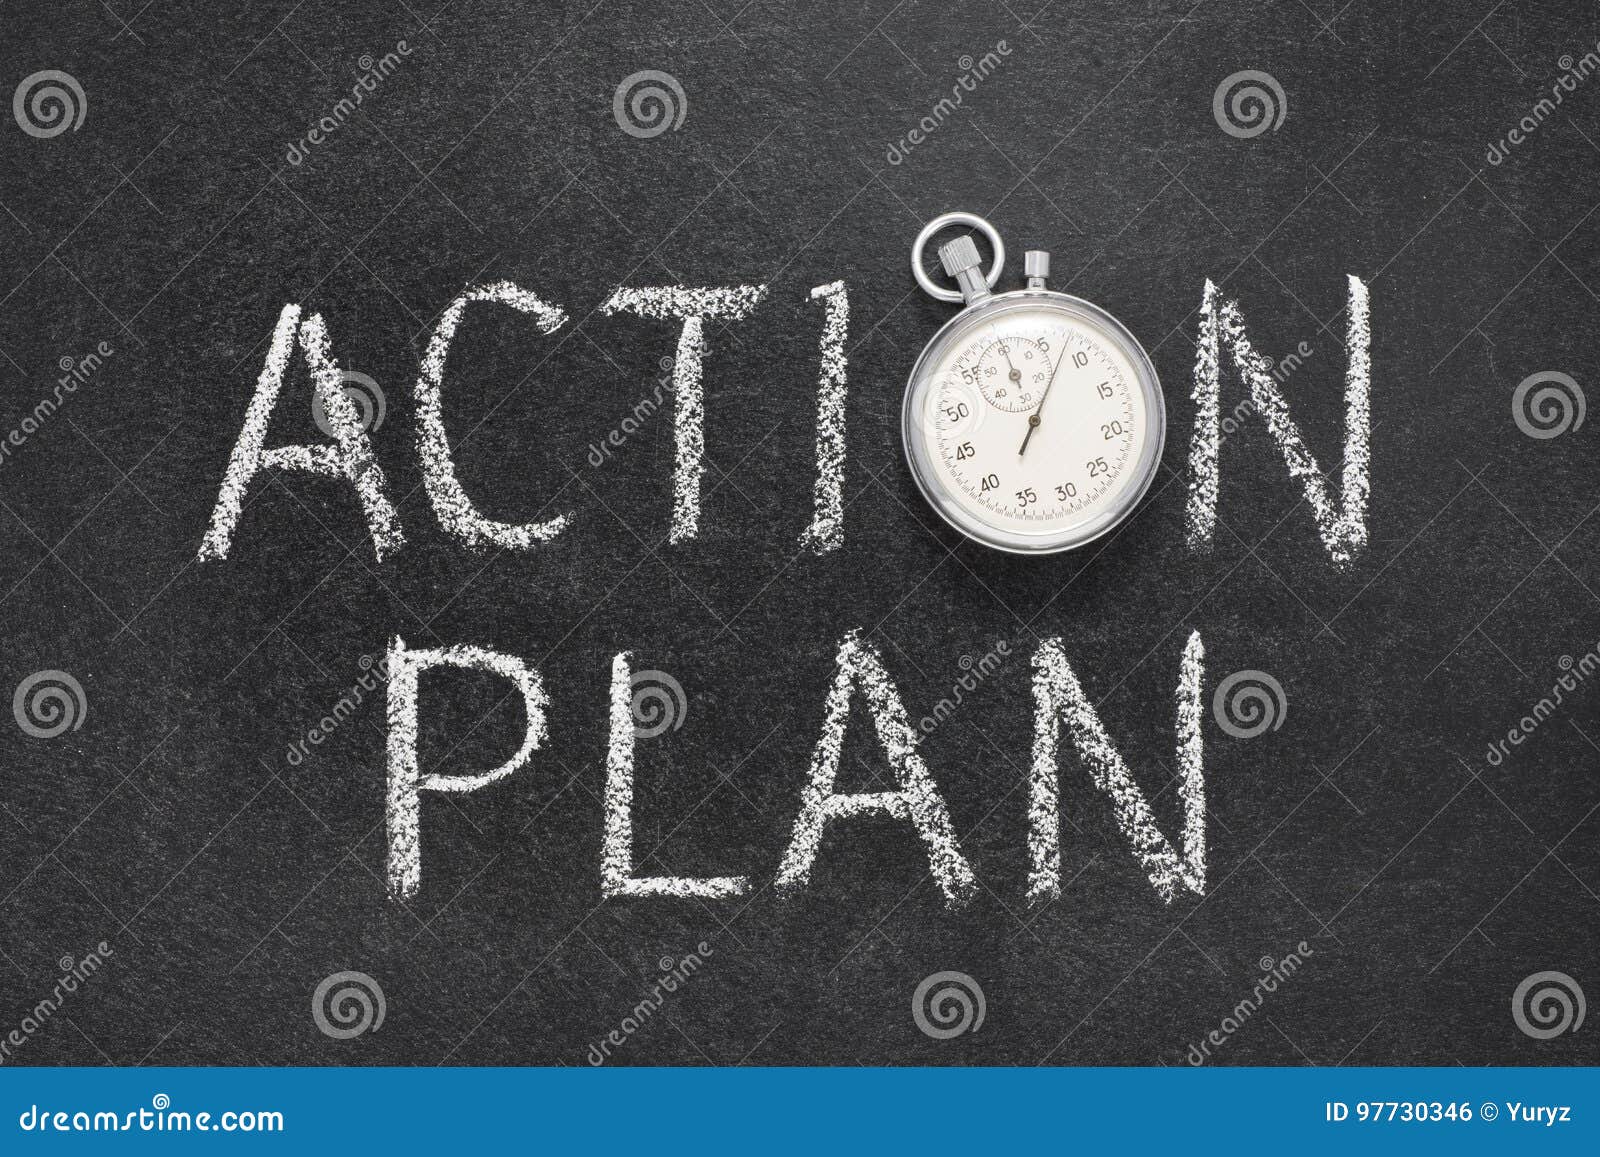 action plan watch